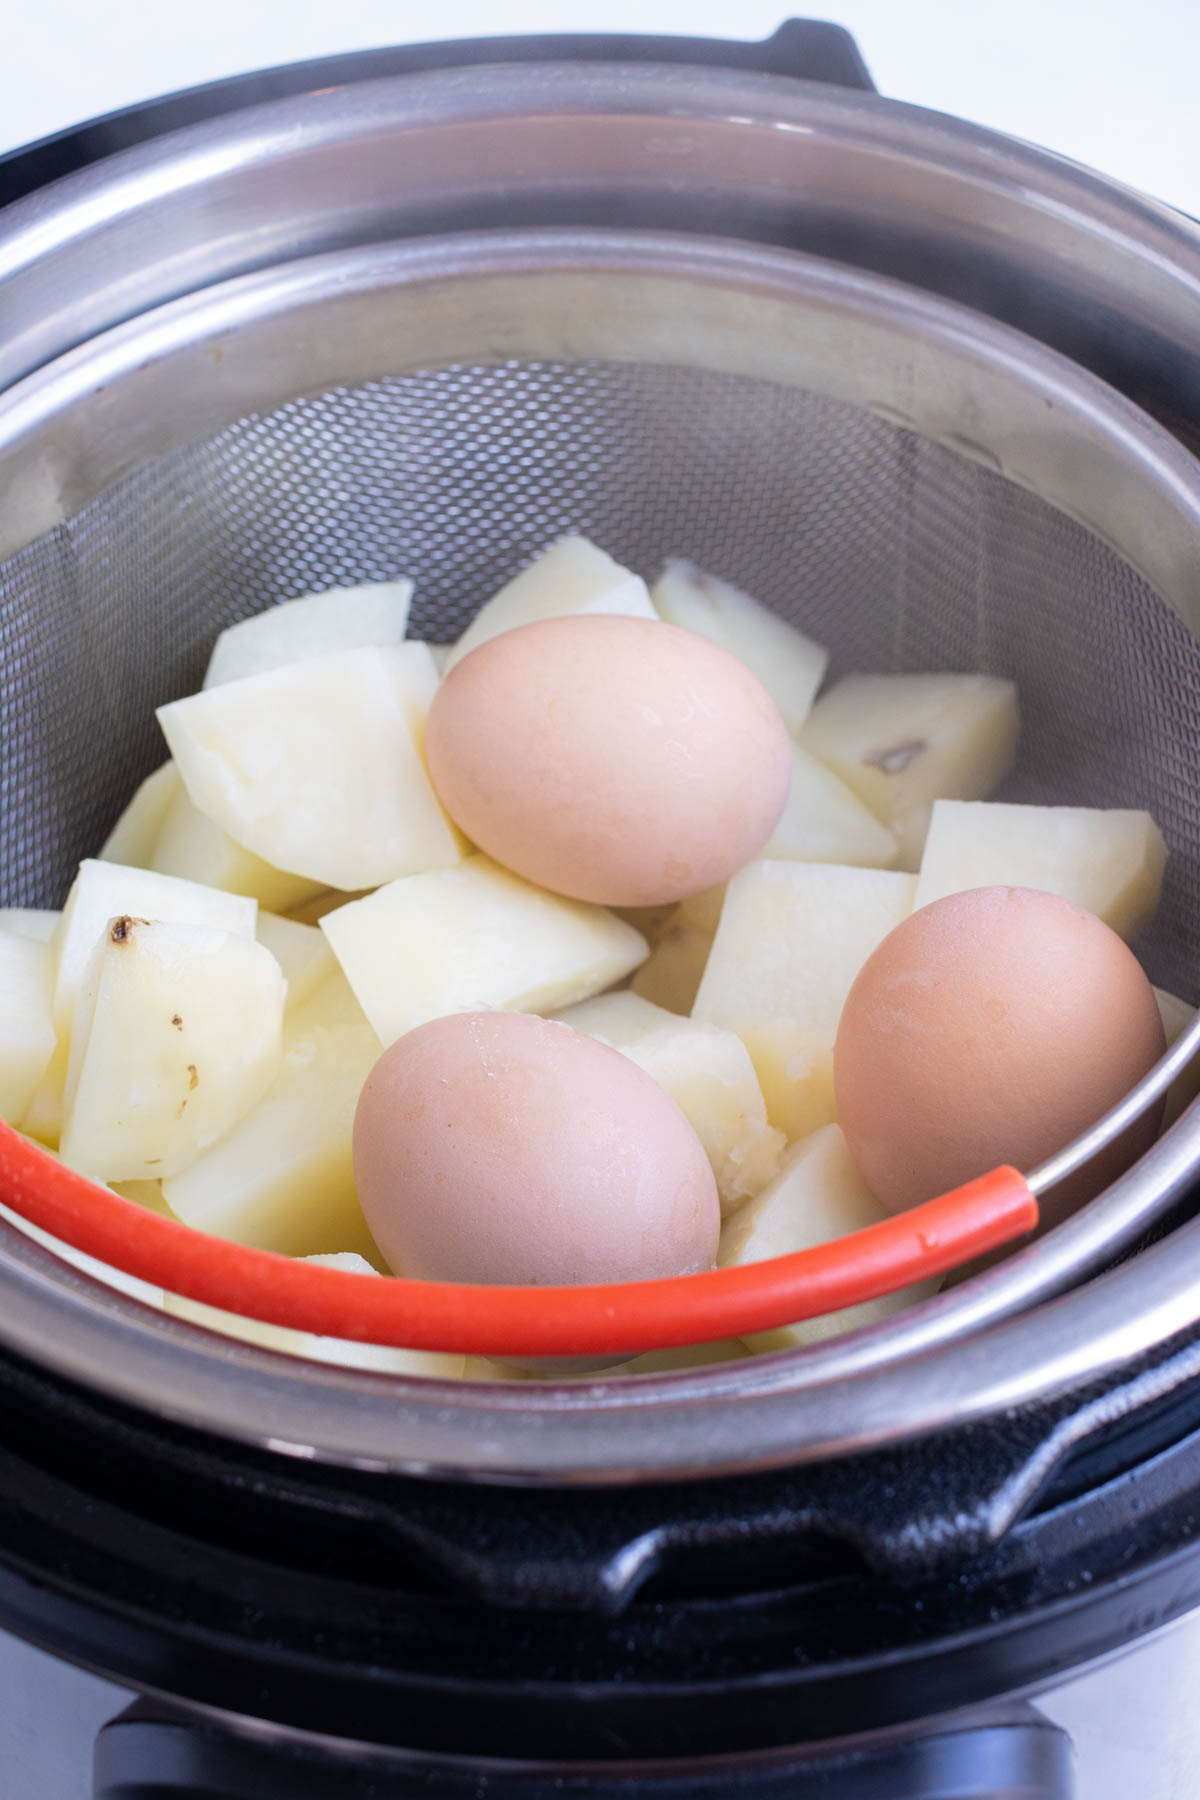 Once cooking is done, cooked eggs are removed from the soft cooked potatoes.